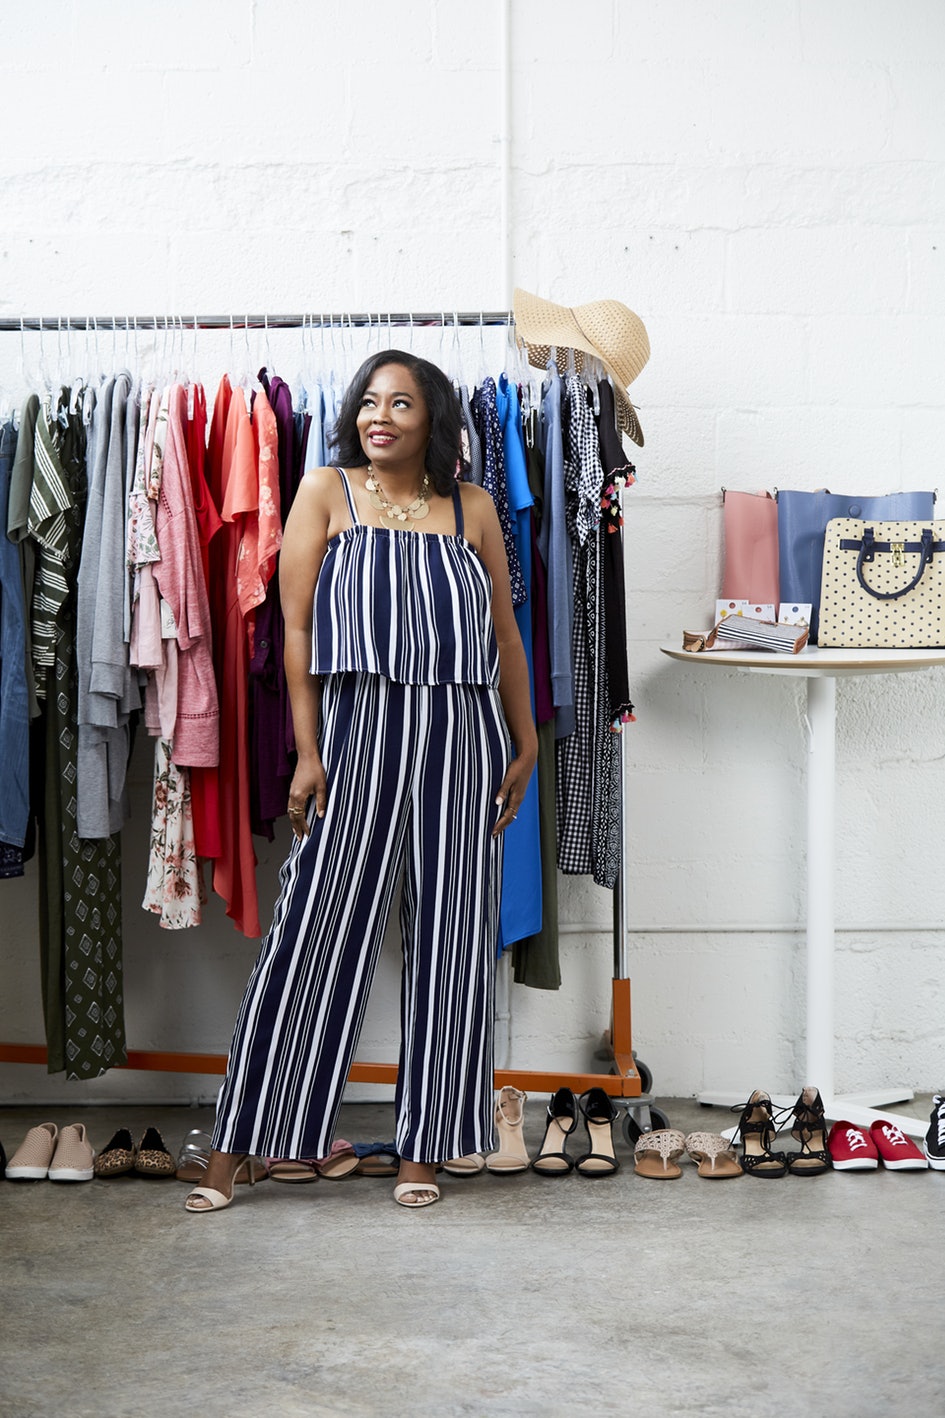 My Interview/Fashion Shoot With Bustle/The Style Squad Presented By Walmart